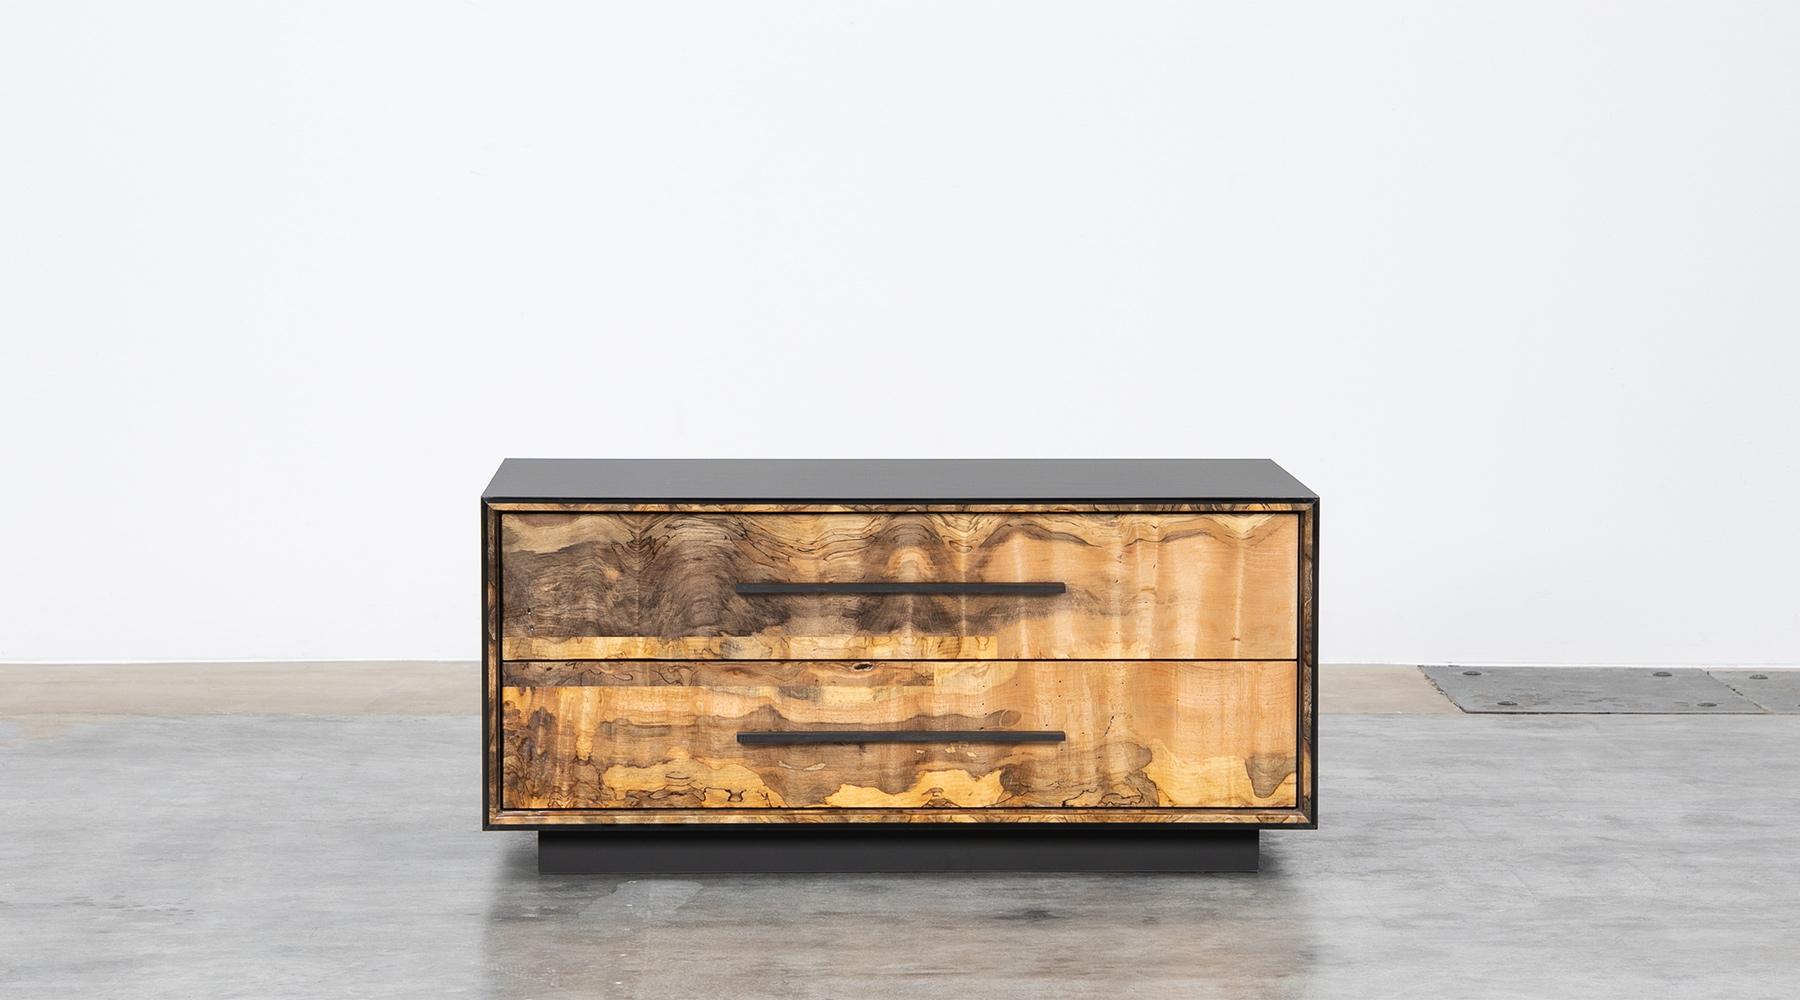 Dresser by contemporary German artist Johannes Hock. The Body is made of ultramatt HPL, the front of solid spalted beech with ebony handles. This piece features two soft-close drawers. Manufactured by Atelier Johannes Hock.

Spalted beech is wood